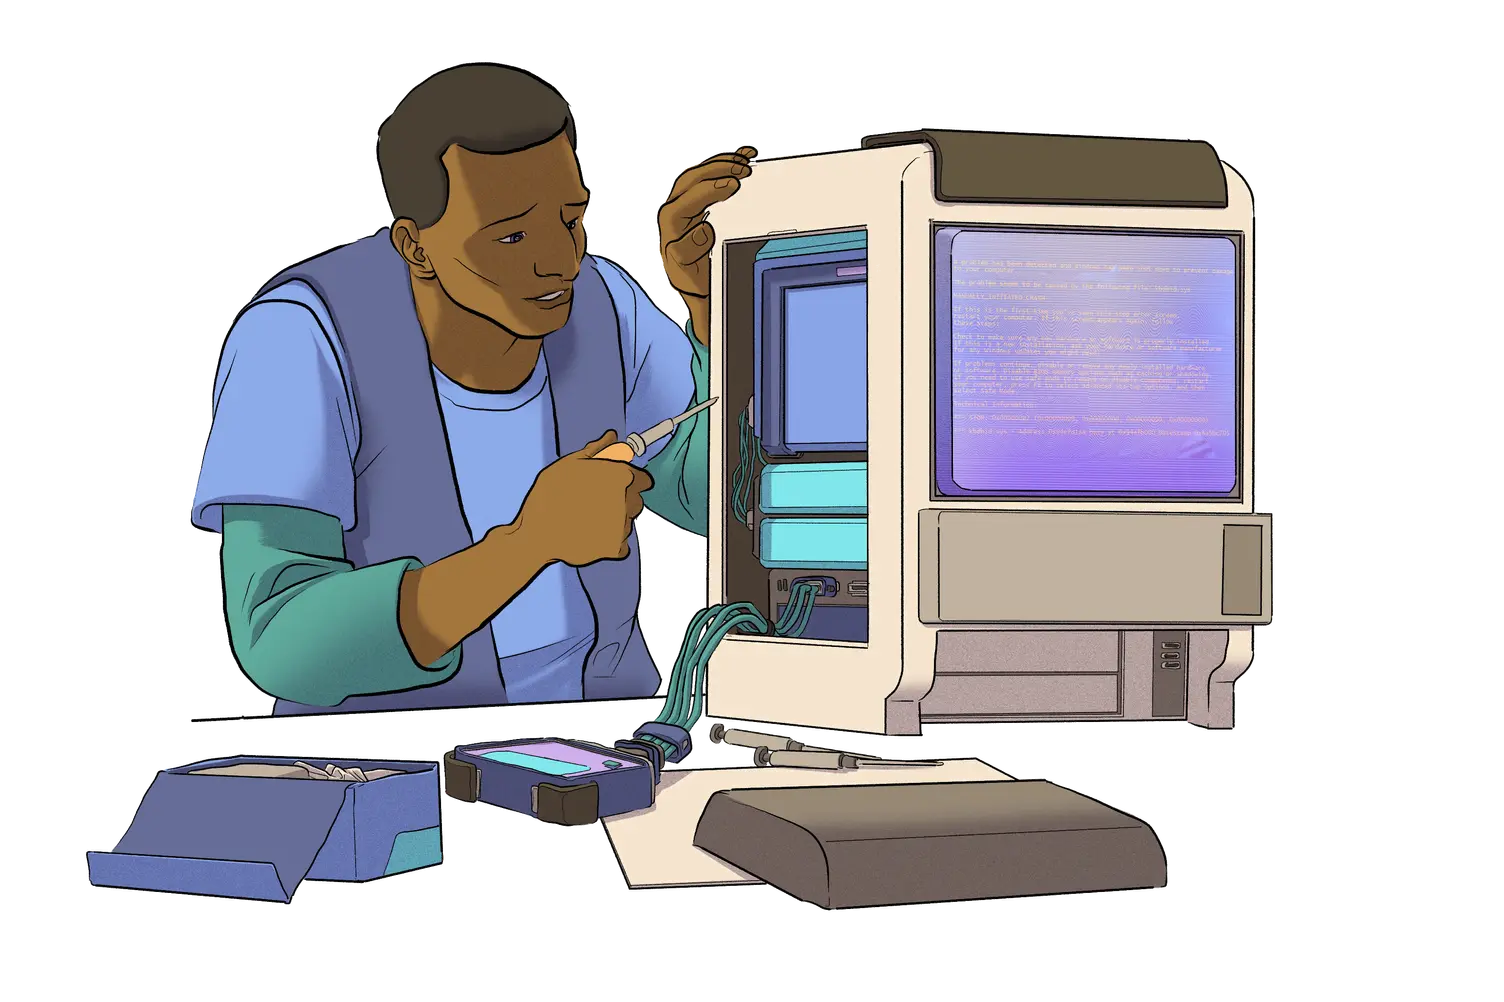 Illustration of a person working on a computer.